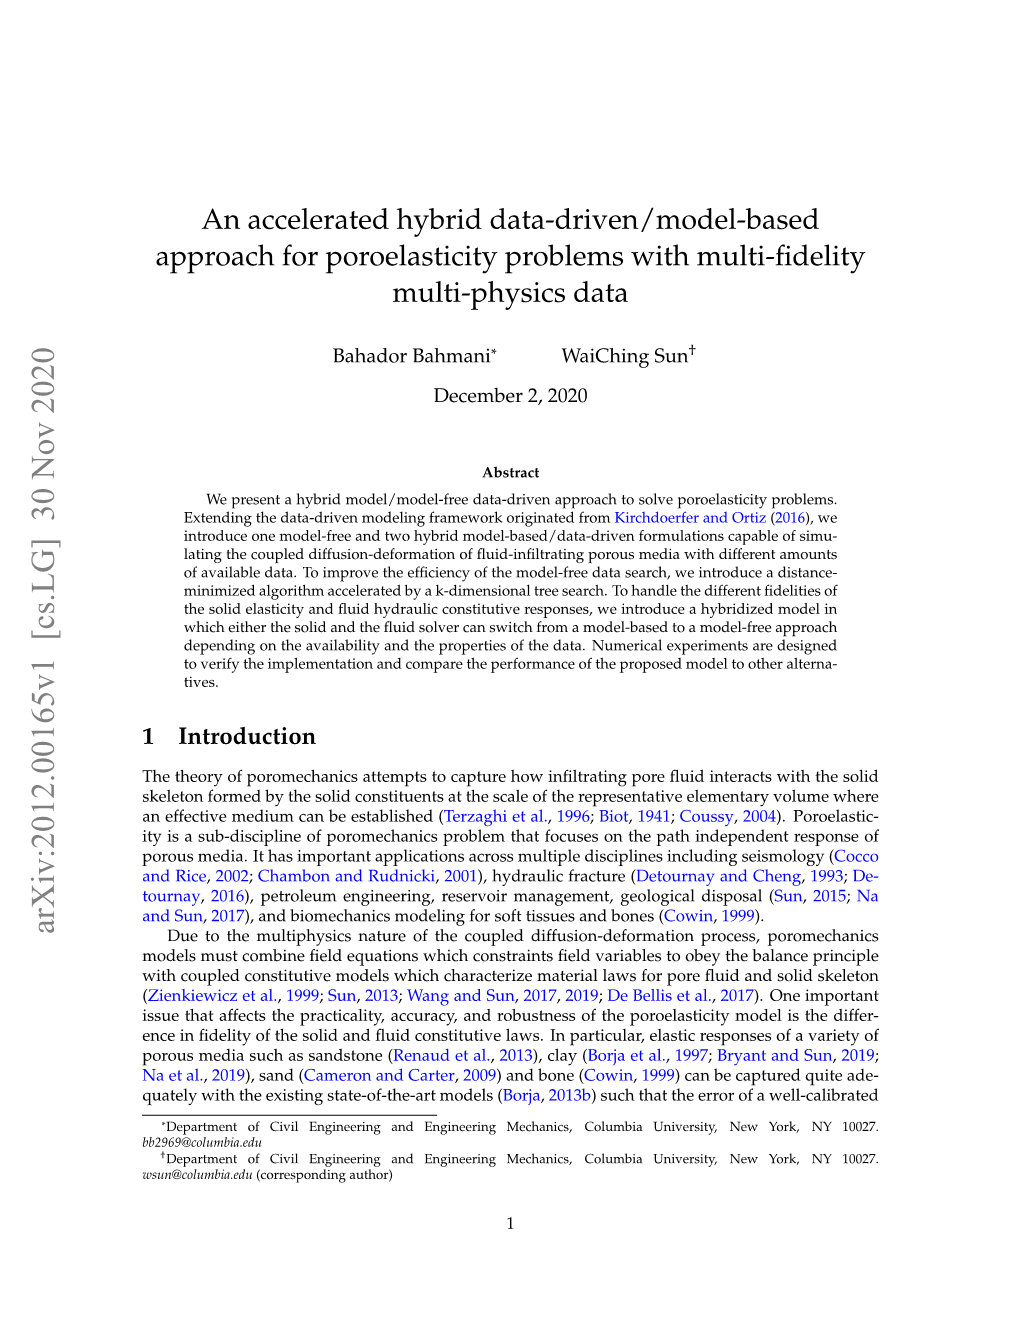 An Accelerated Hybrid Data-Driven/Model-Based Approach for Poroelasticity Problems with Multi-ﬁdelity Multi-Physics Data